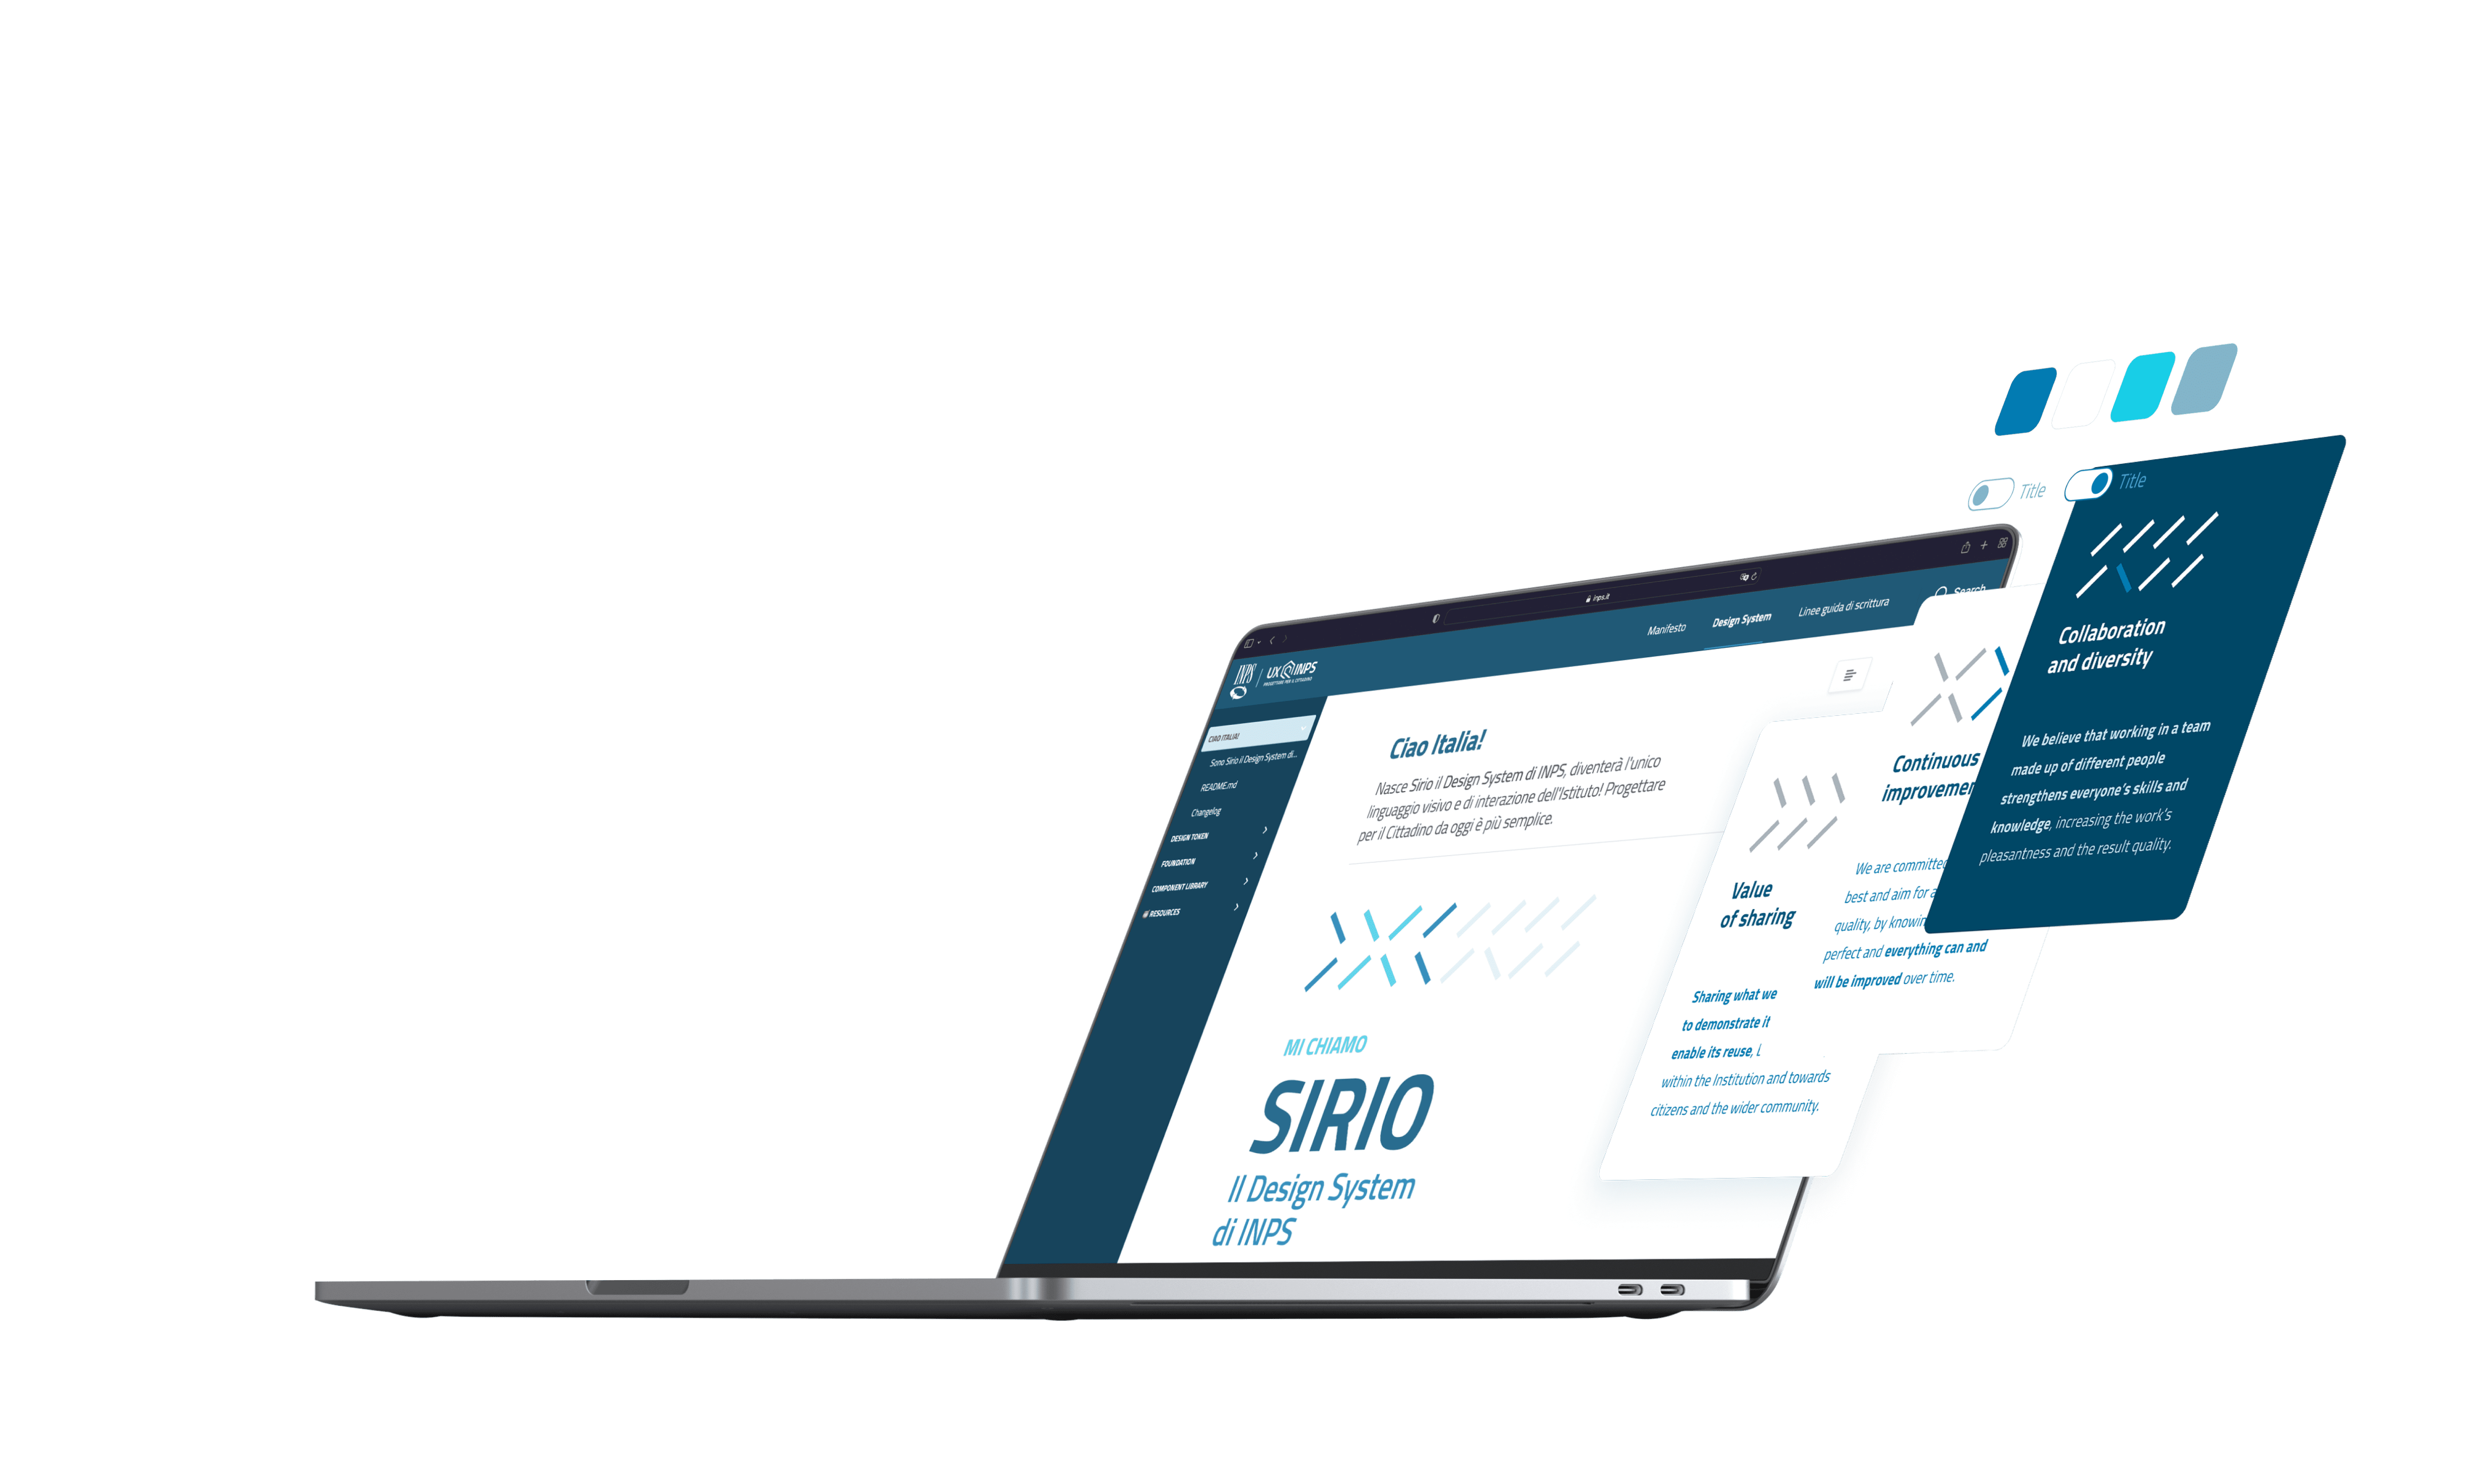 View of the Sirio homepage and various other components of the design system in a laptop